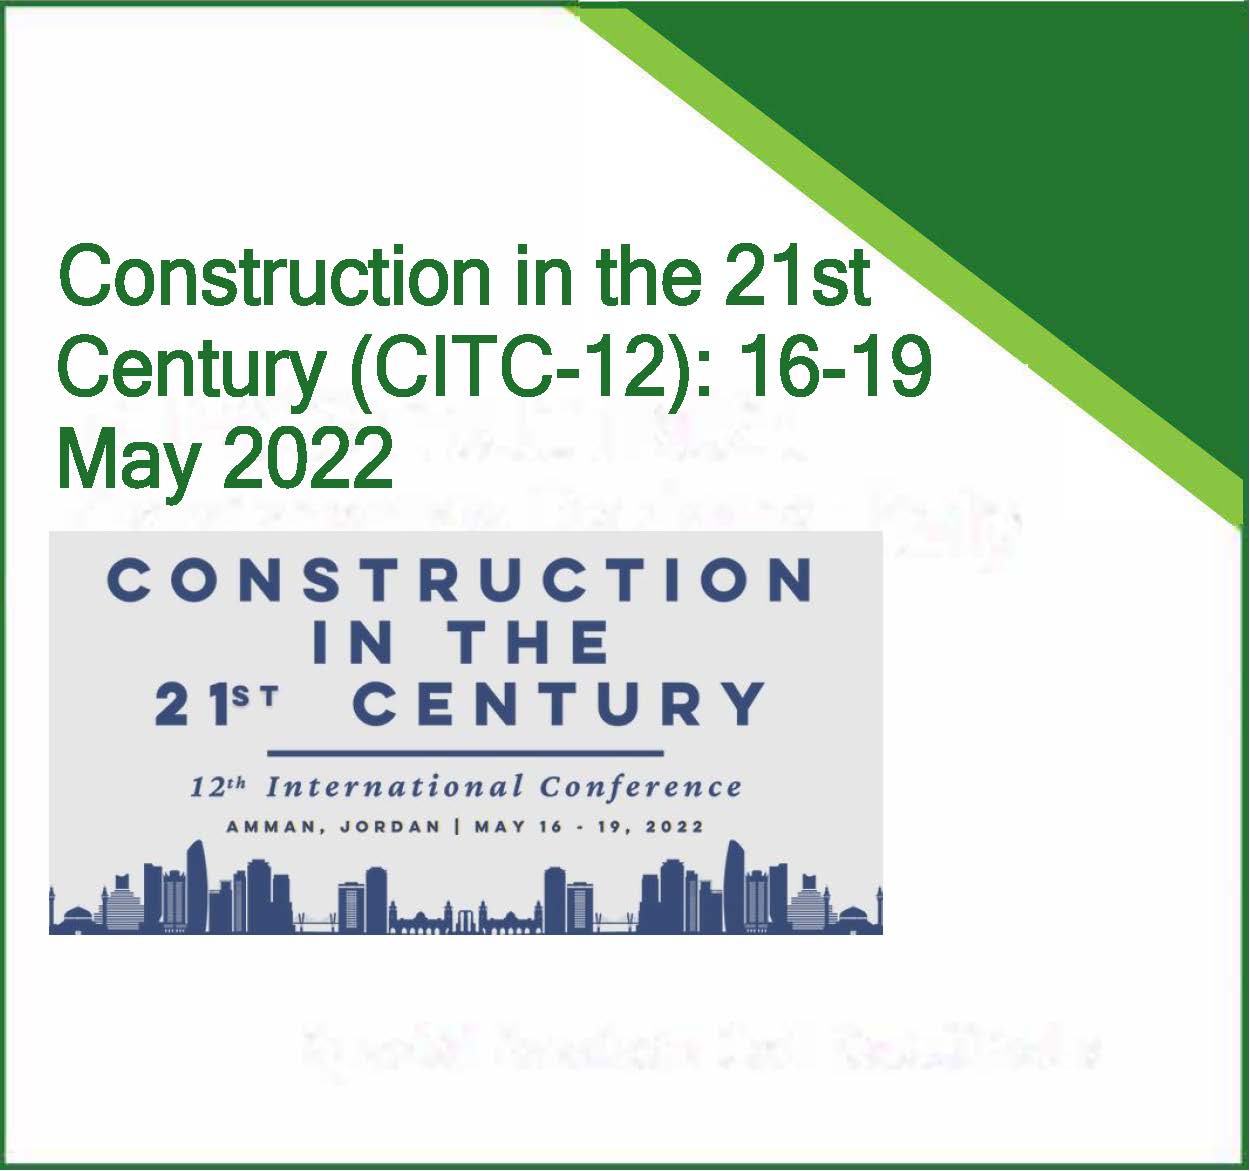 The 12th International Conference on Construction in the 21st Century (CITC-12)